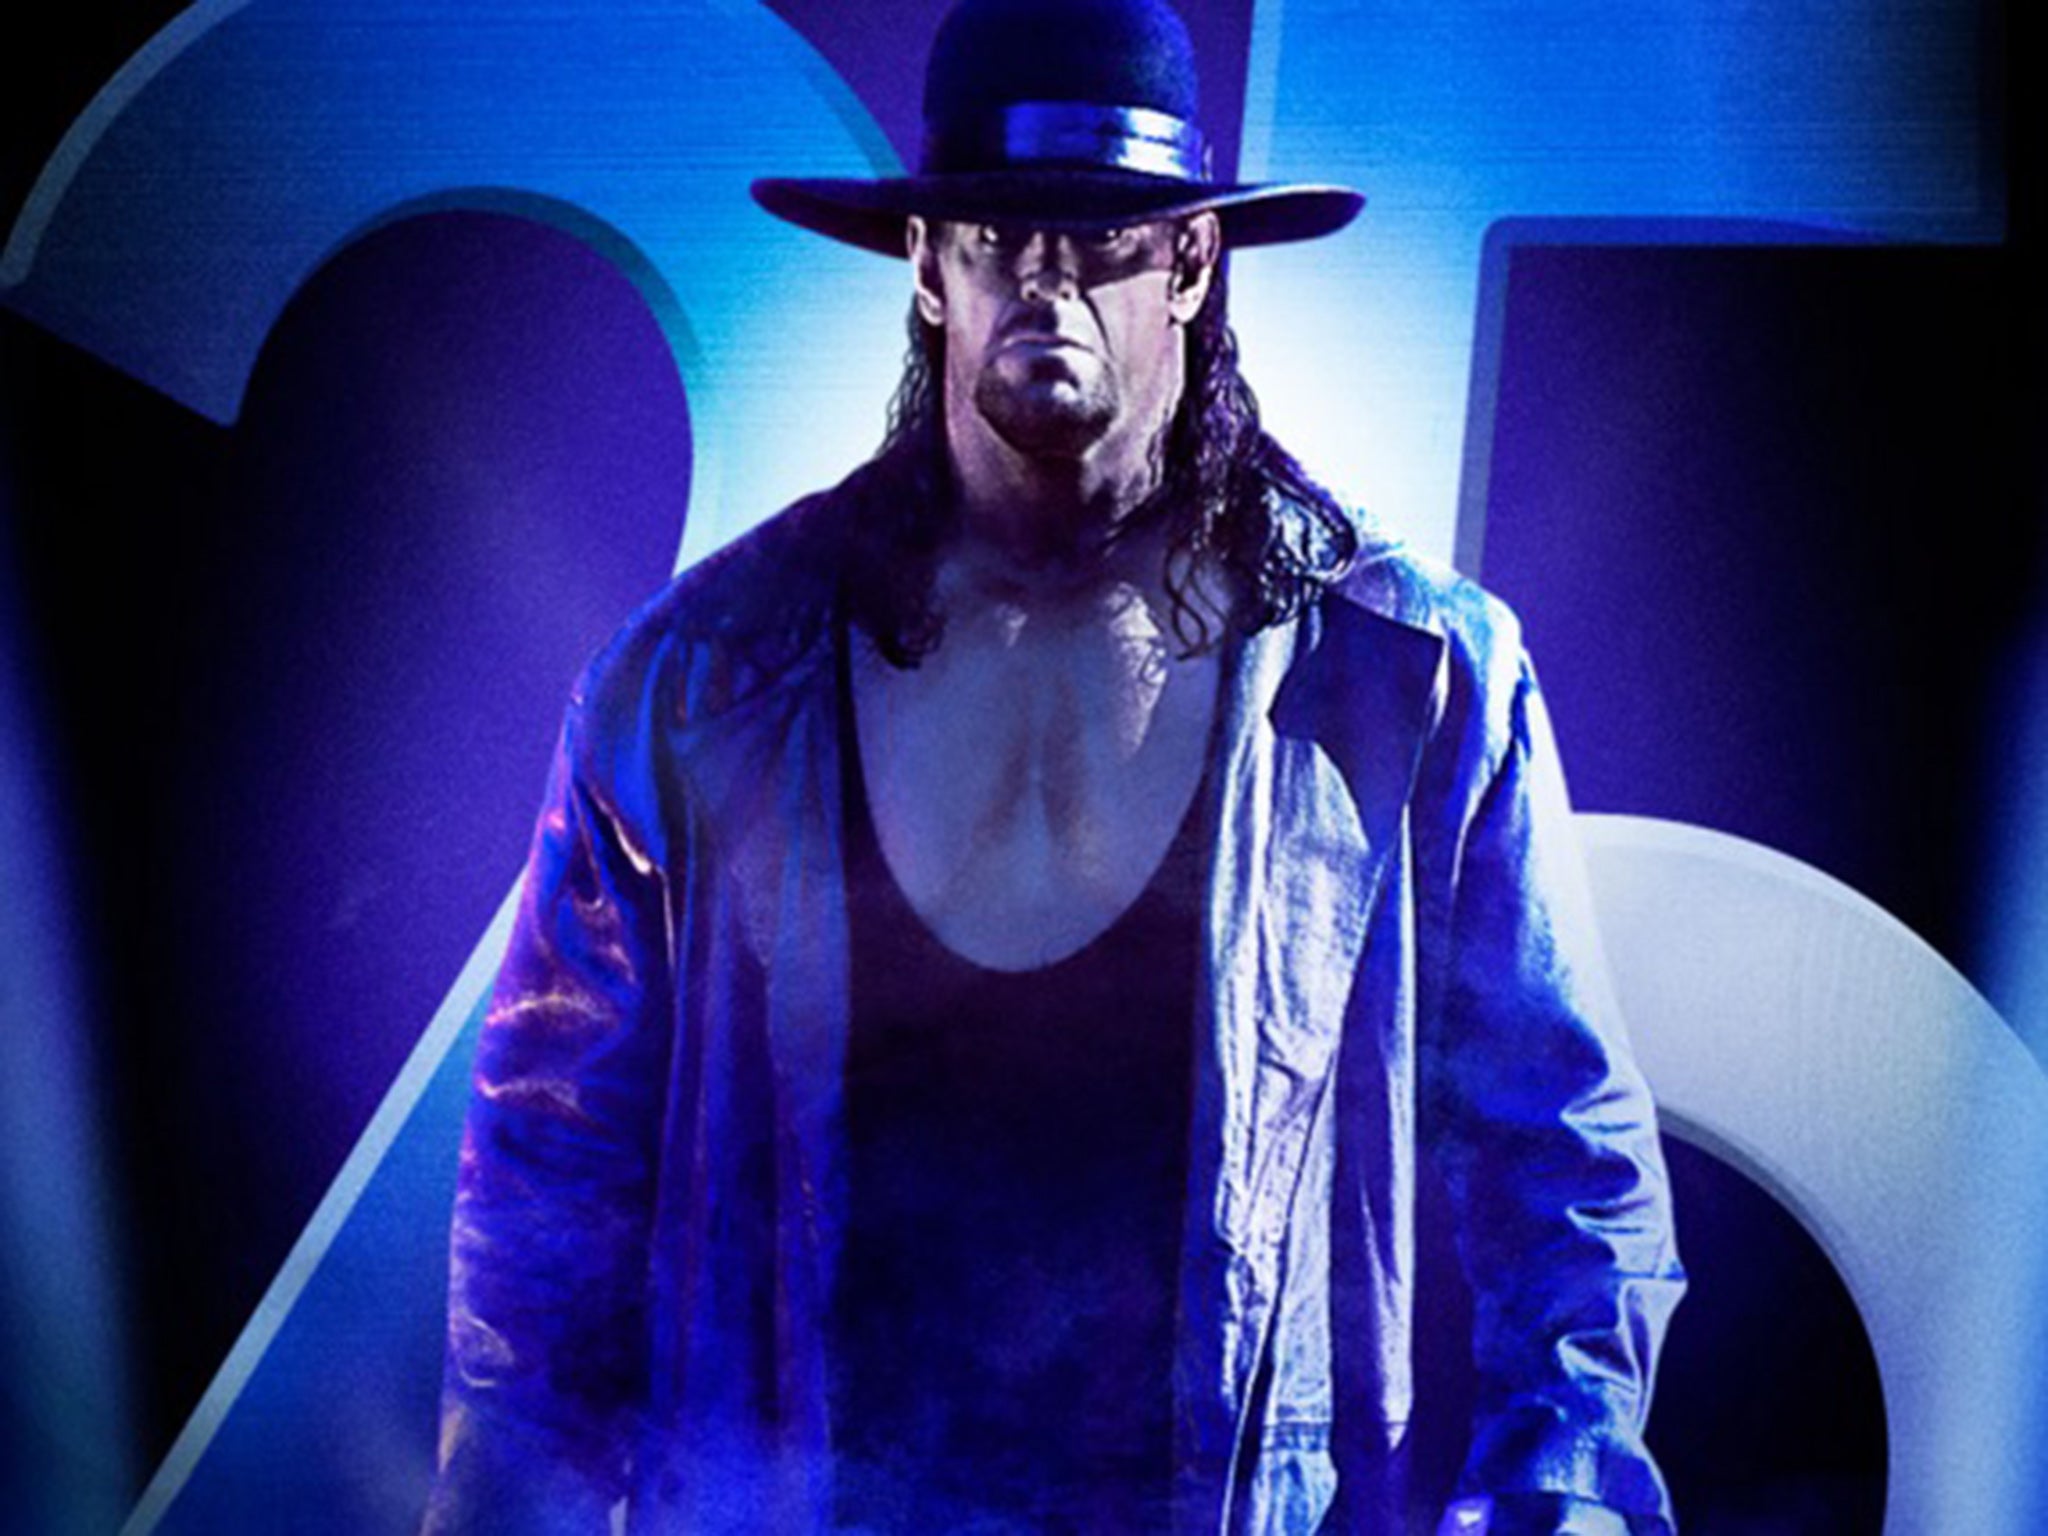 The Undertaker will team up with his brother Kane